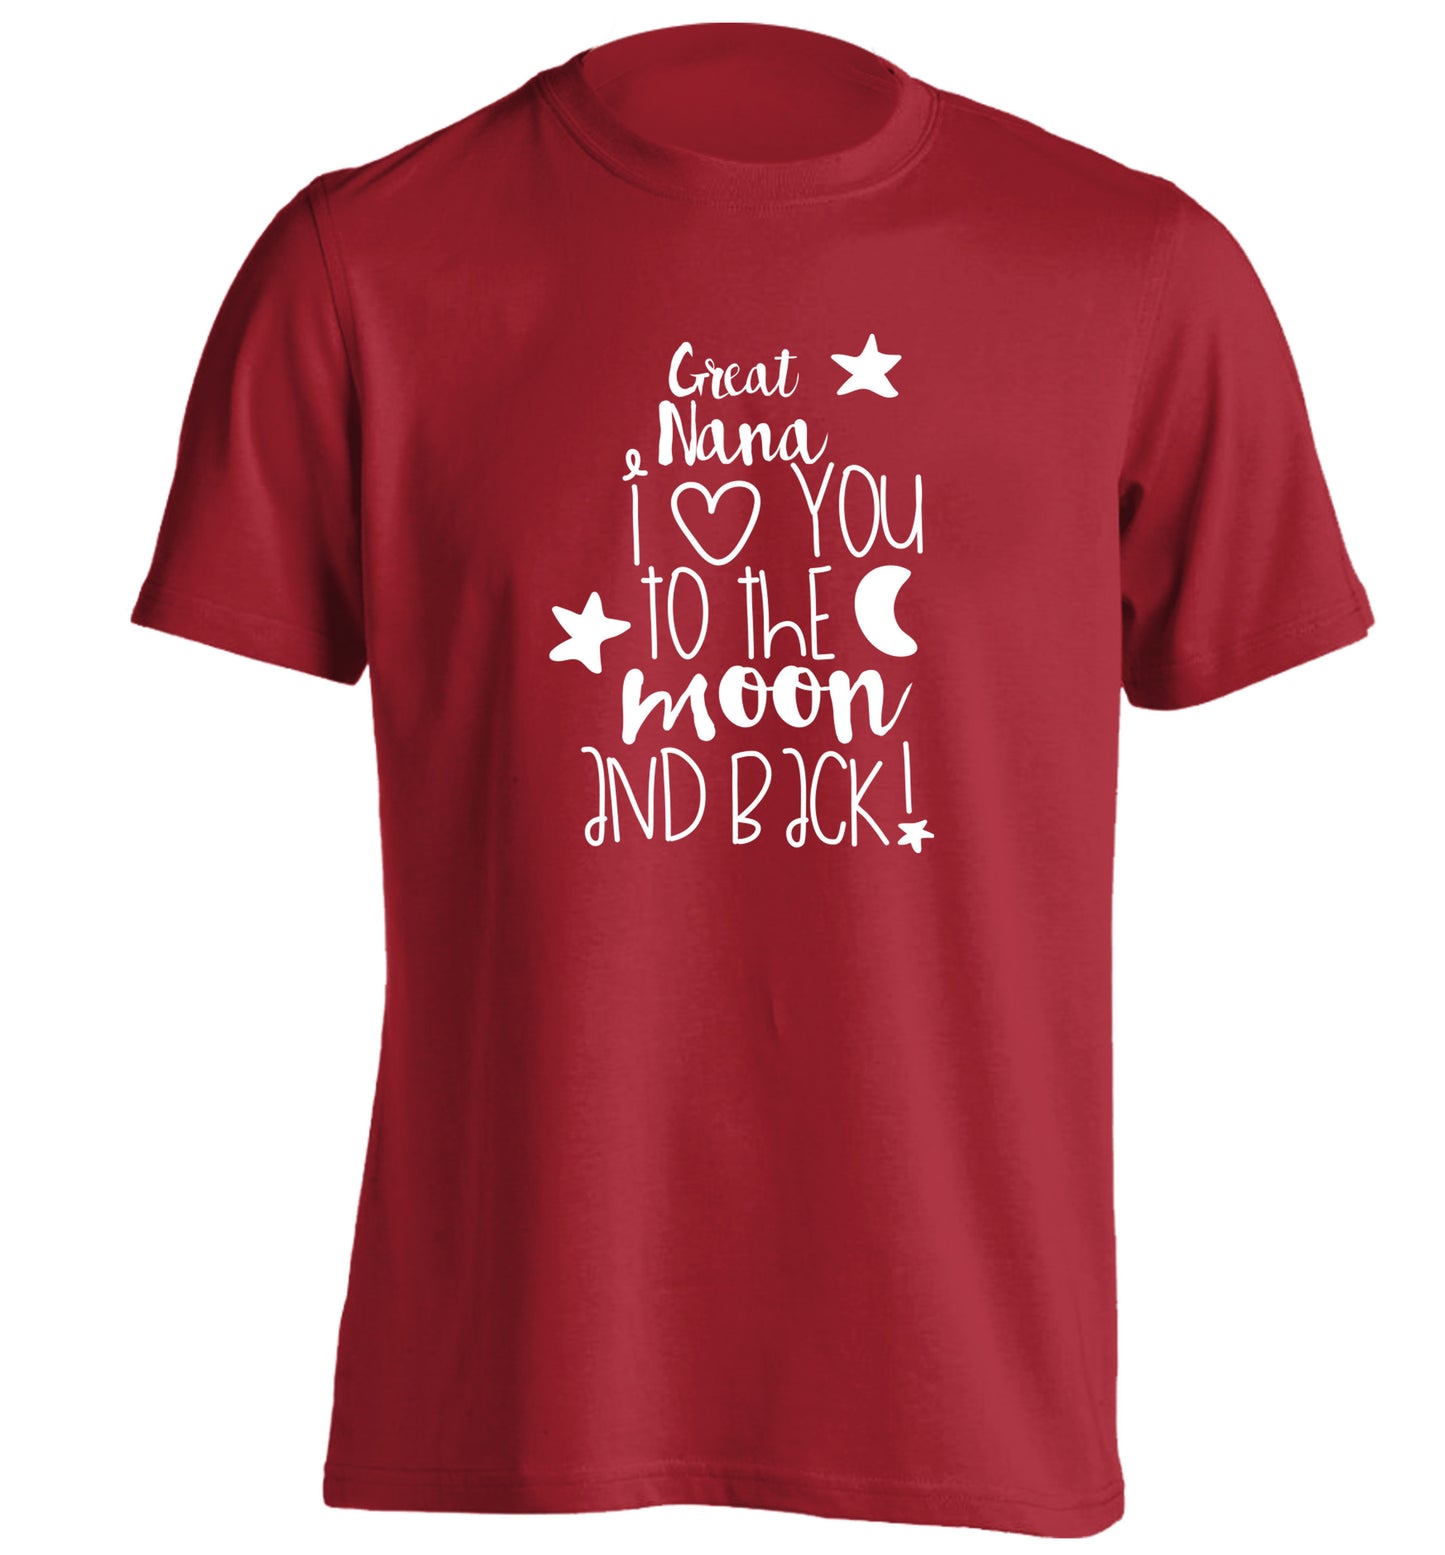 Great Nana I love you to the moon and back adults unisex red Tshirt 2XL